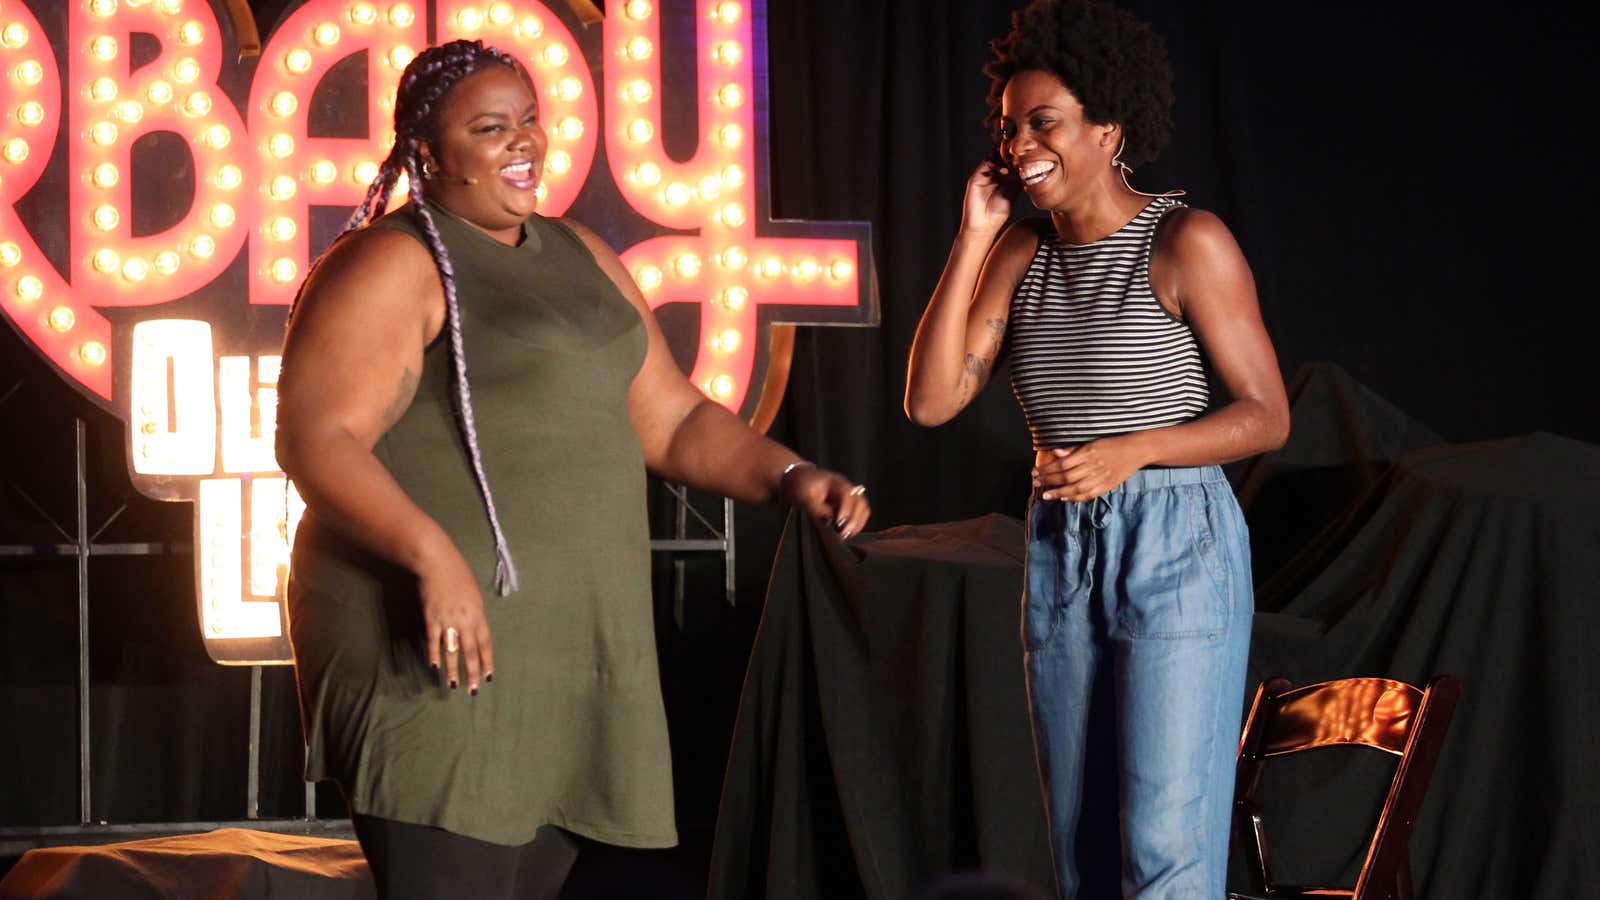 Nicole Byer and Sasheer Zamata perform on The Barbary Stage during the 2016 Outside Lands Music And Arts Festival at Golden Gate Park in San Francisco.